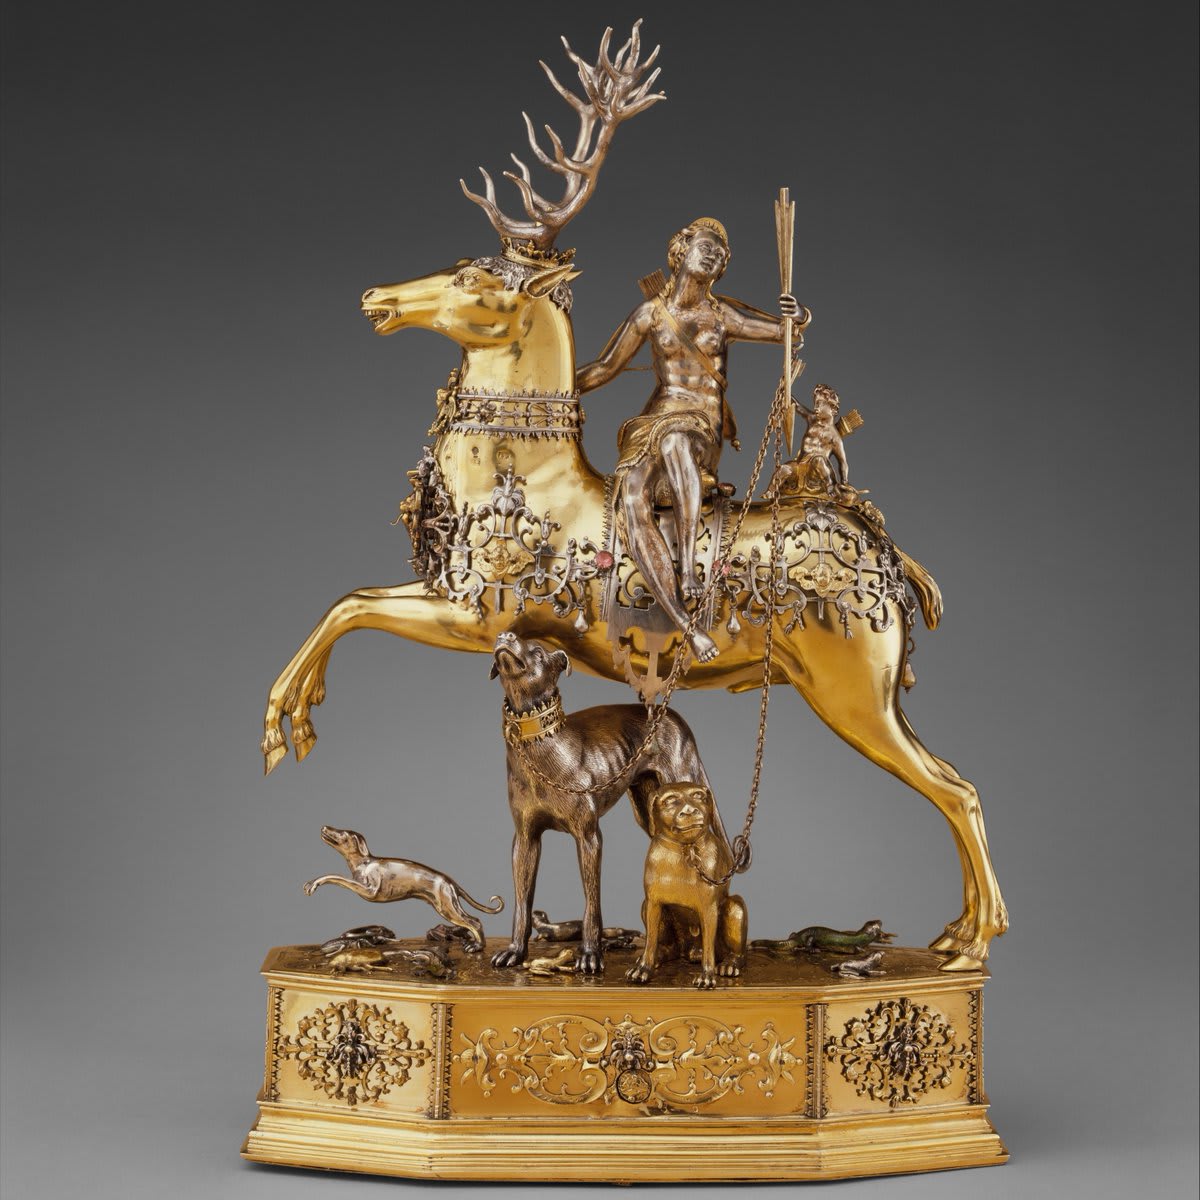 1/4 This month in honor of ADA30, we're inviting Disabled artists to respond to a work from the MetCollection that sparks their curiosity or inspires them. Today, Michelle Miles (@michellenmiles) shares her thoughts on Joachim Friess' automaton: